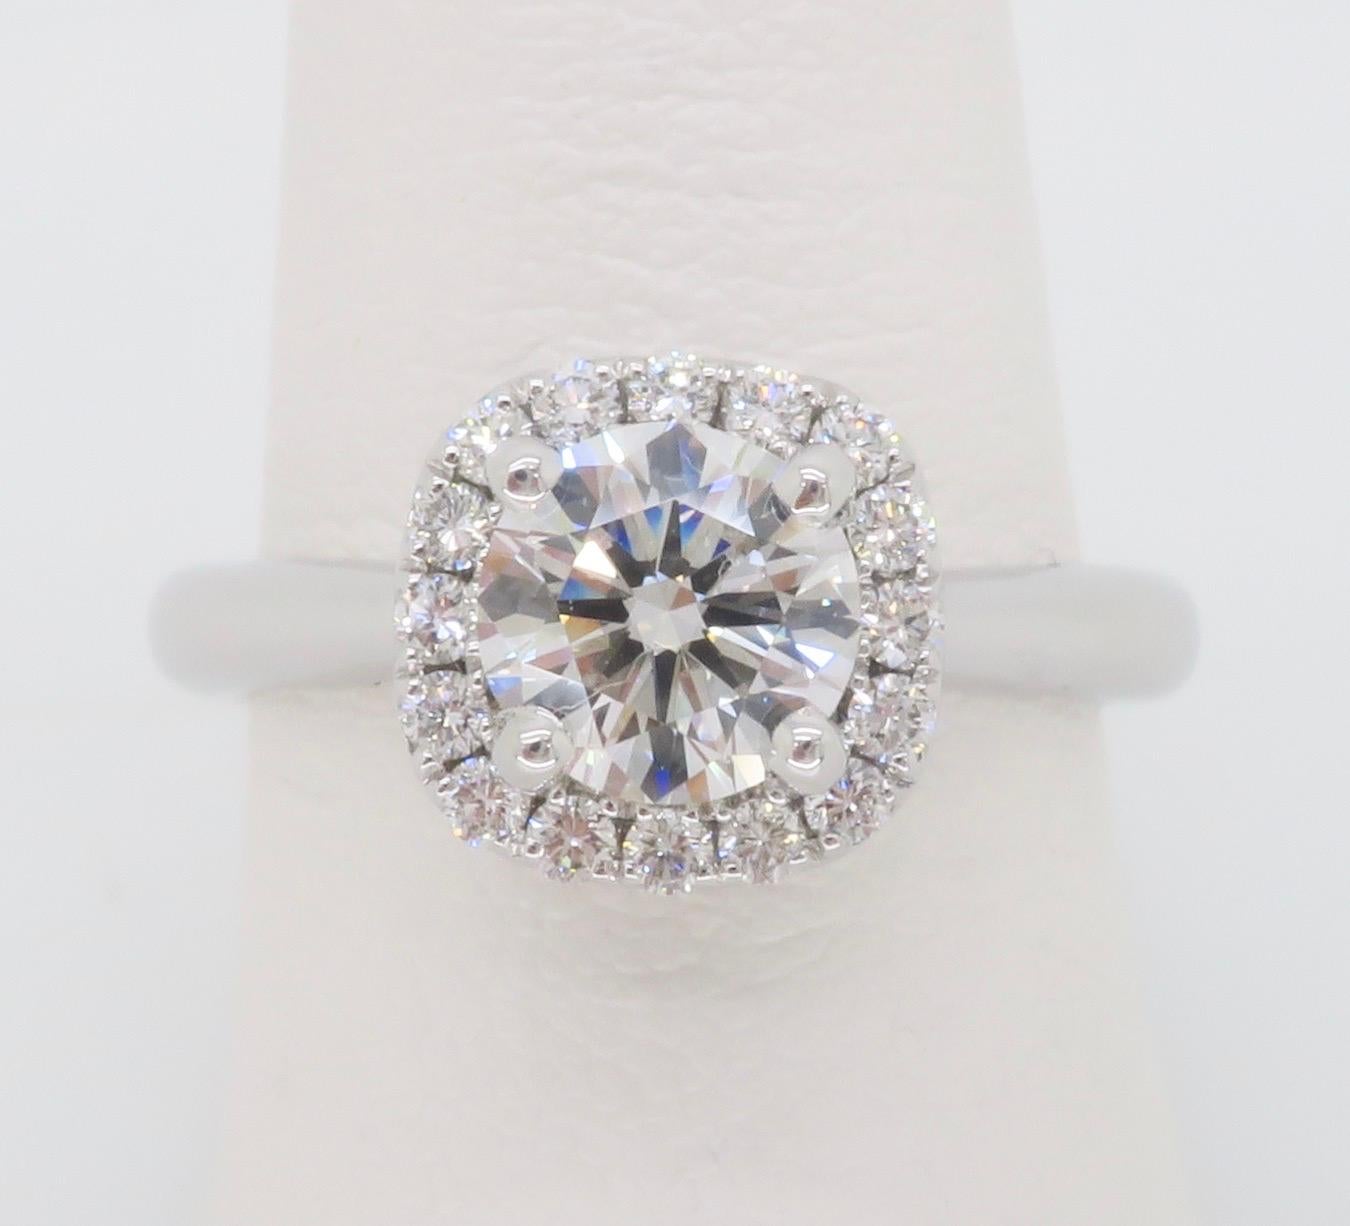 GIA Certified Round Brilliant Cut Diamond in a Stunning Scott Kay Halo Setting  In New Condition For Sale In Webster, NY